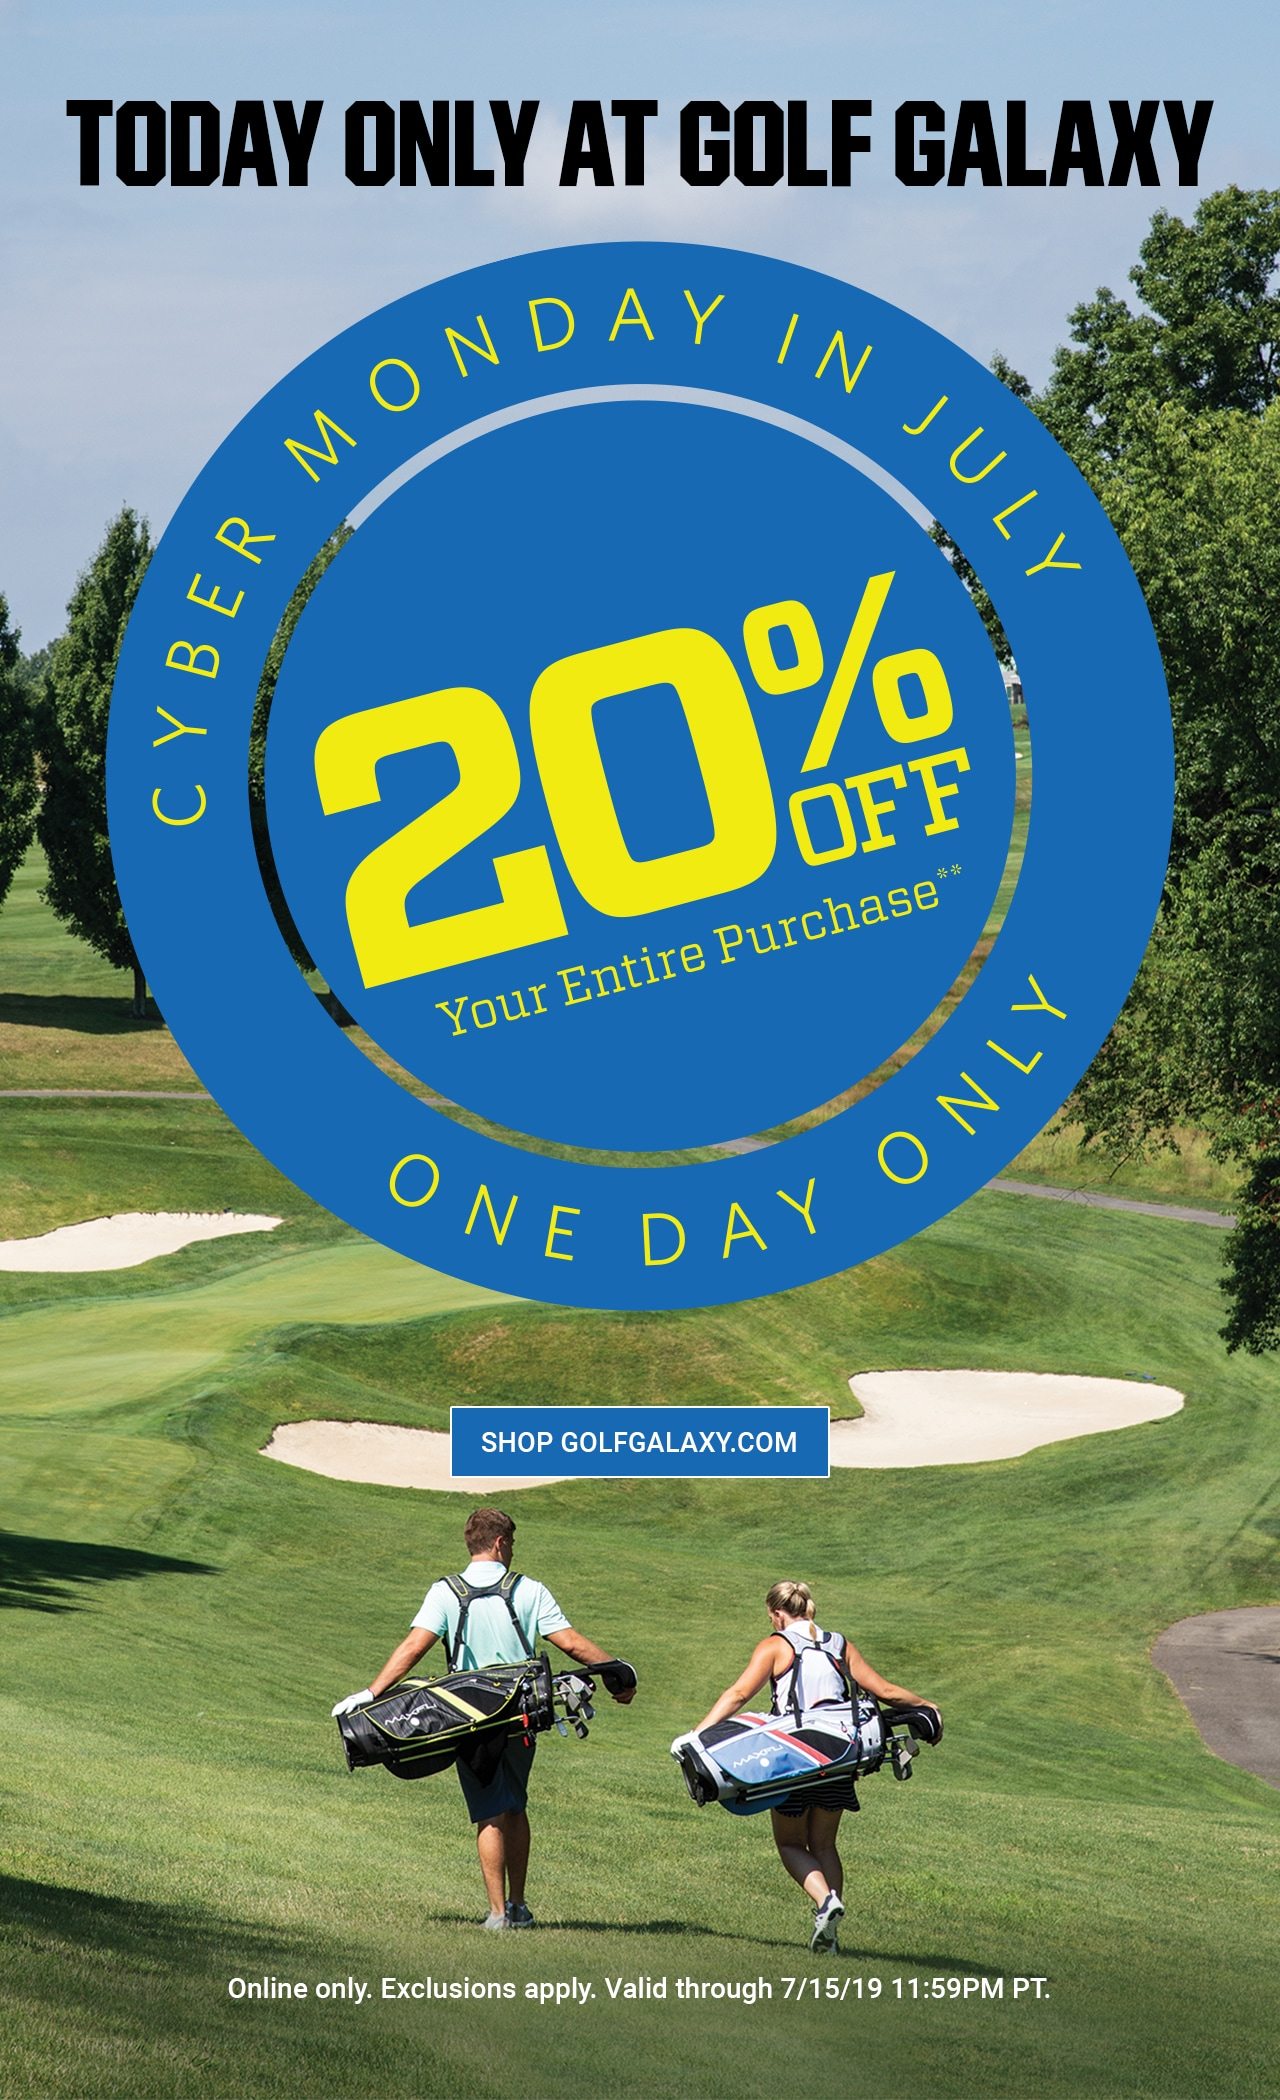 Today Only at Golf Galaxy! Cyber Monday In July! Hurry Ends Tonight! 20% off Your Entire Purchase** Online Only. Exclusions apply. Valid through 7/15/19 11:59PM PT. Shop GolfGalaxy.com